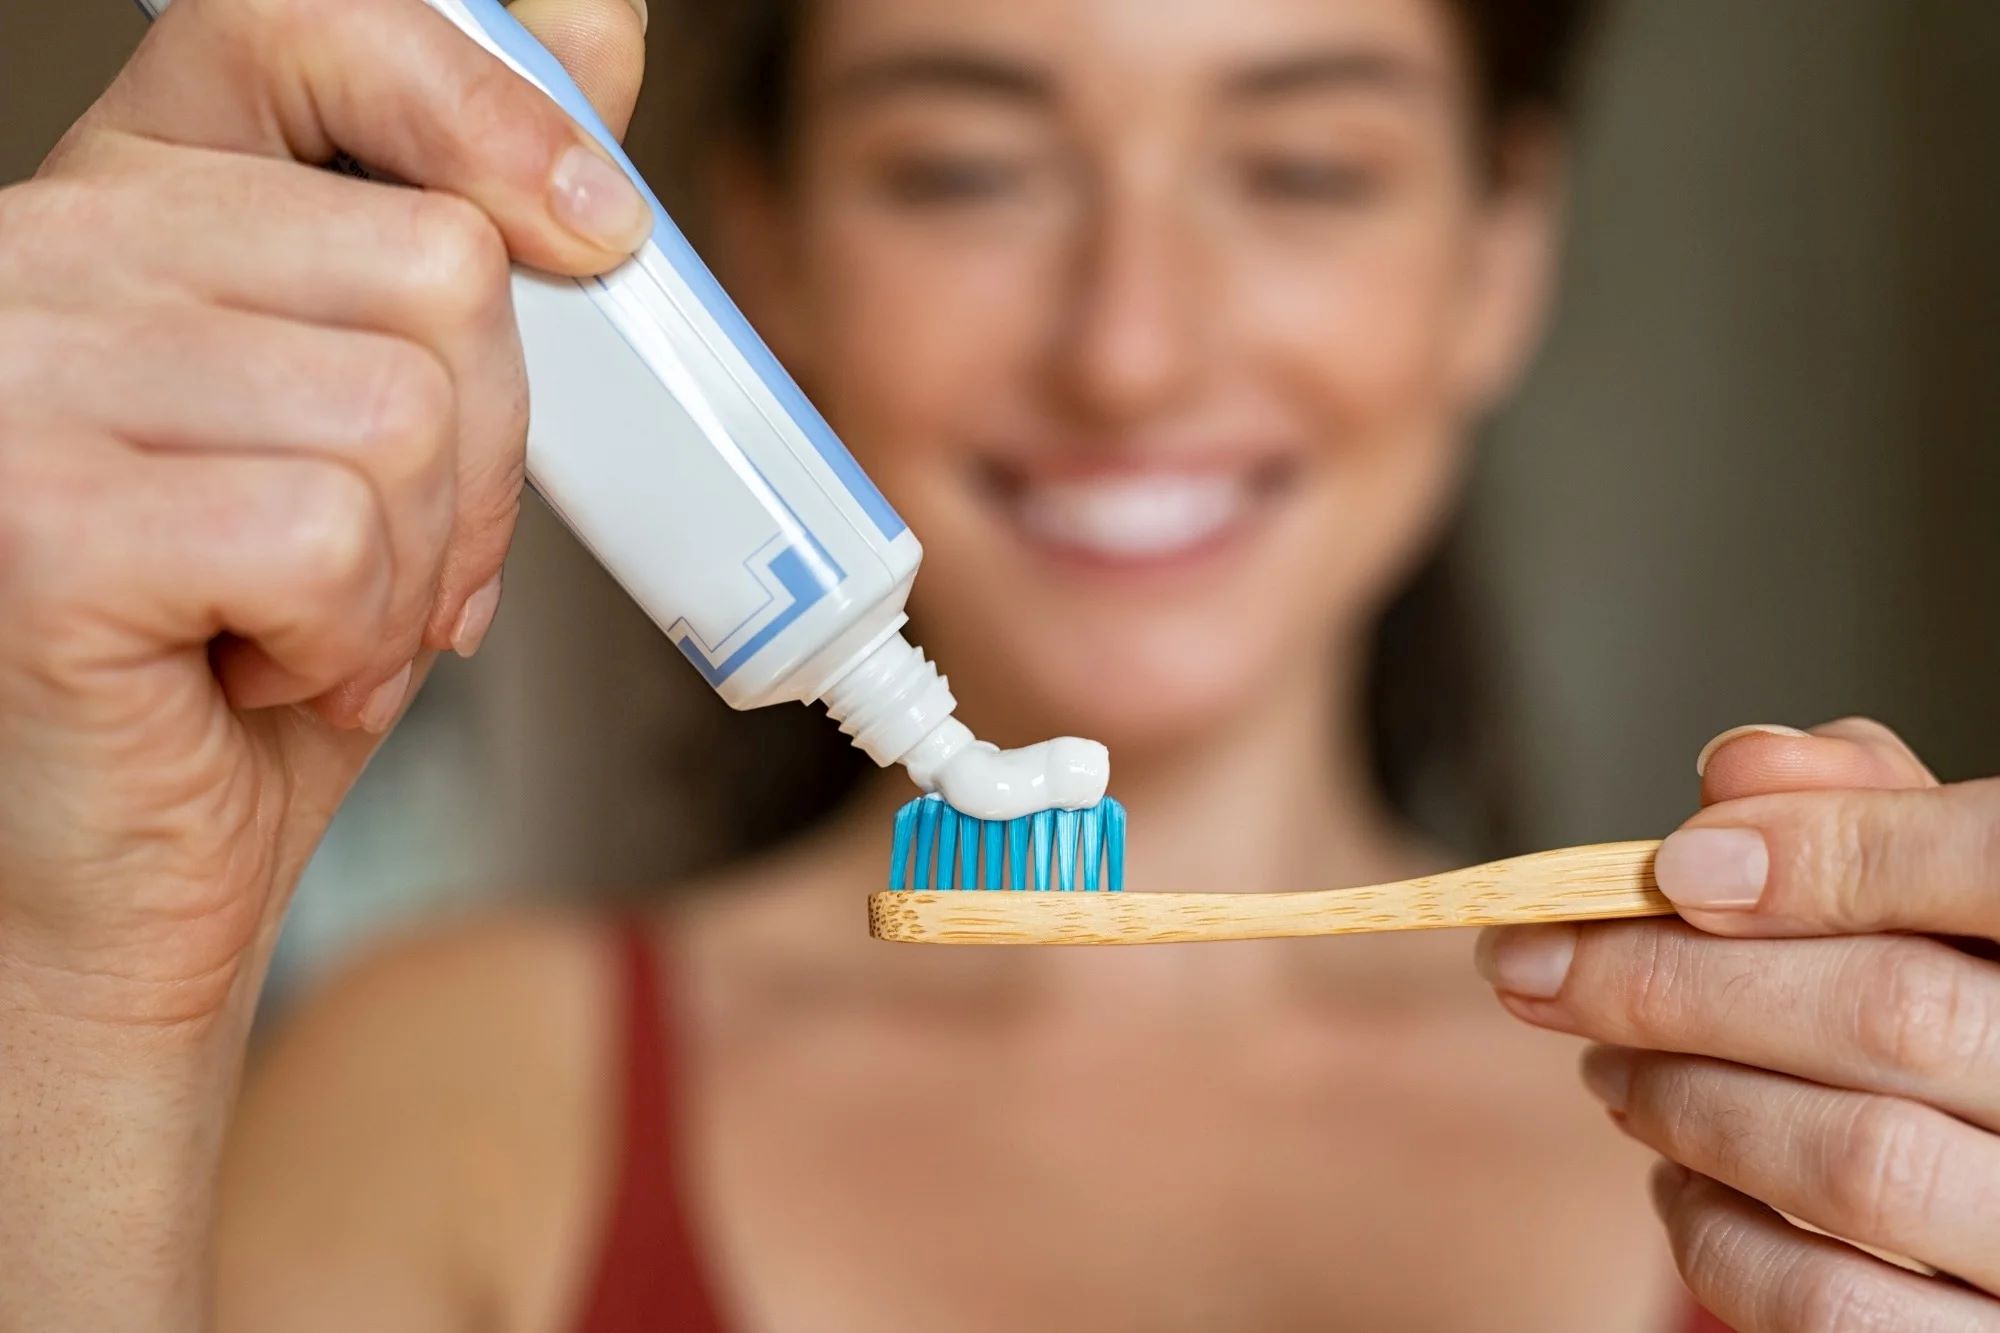 When Should I Change Toothbrush After Covid